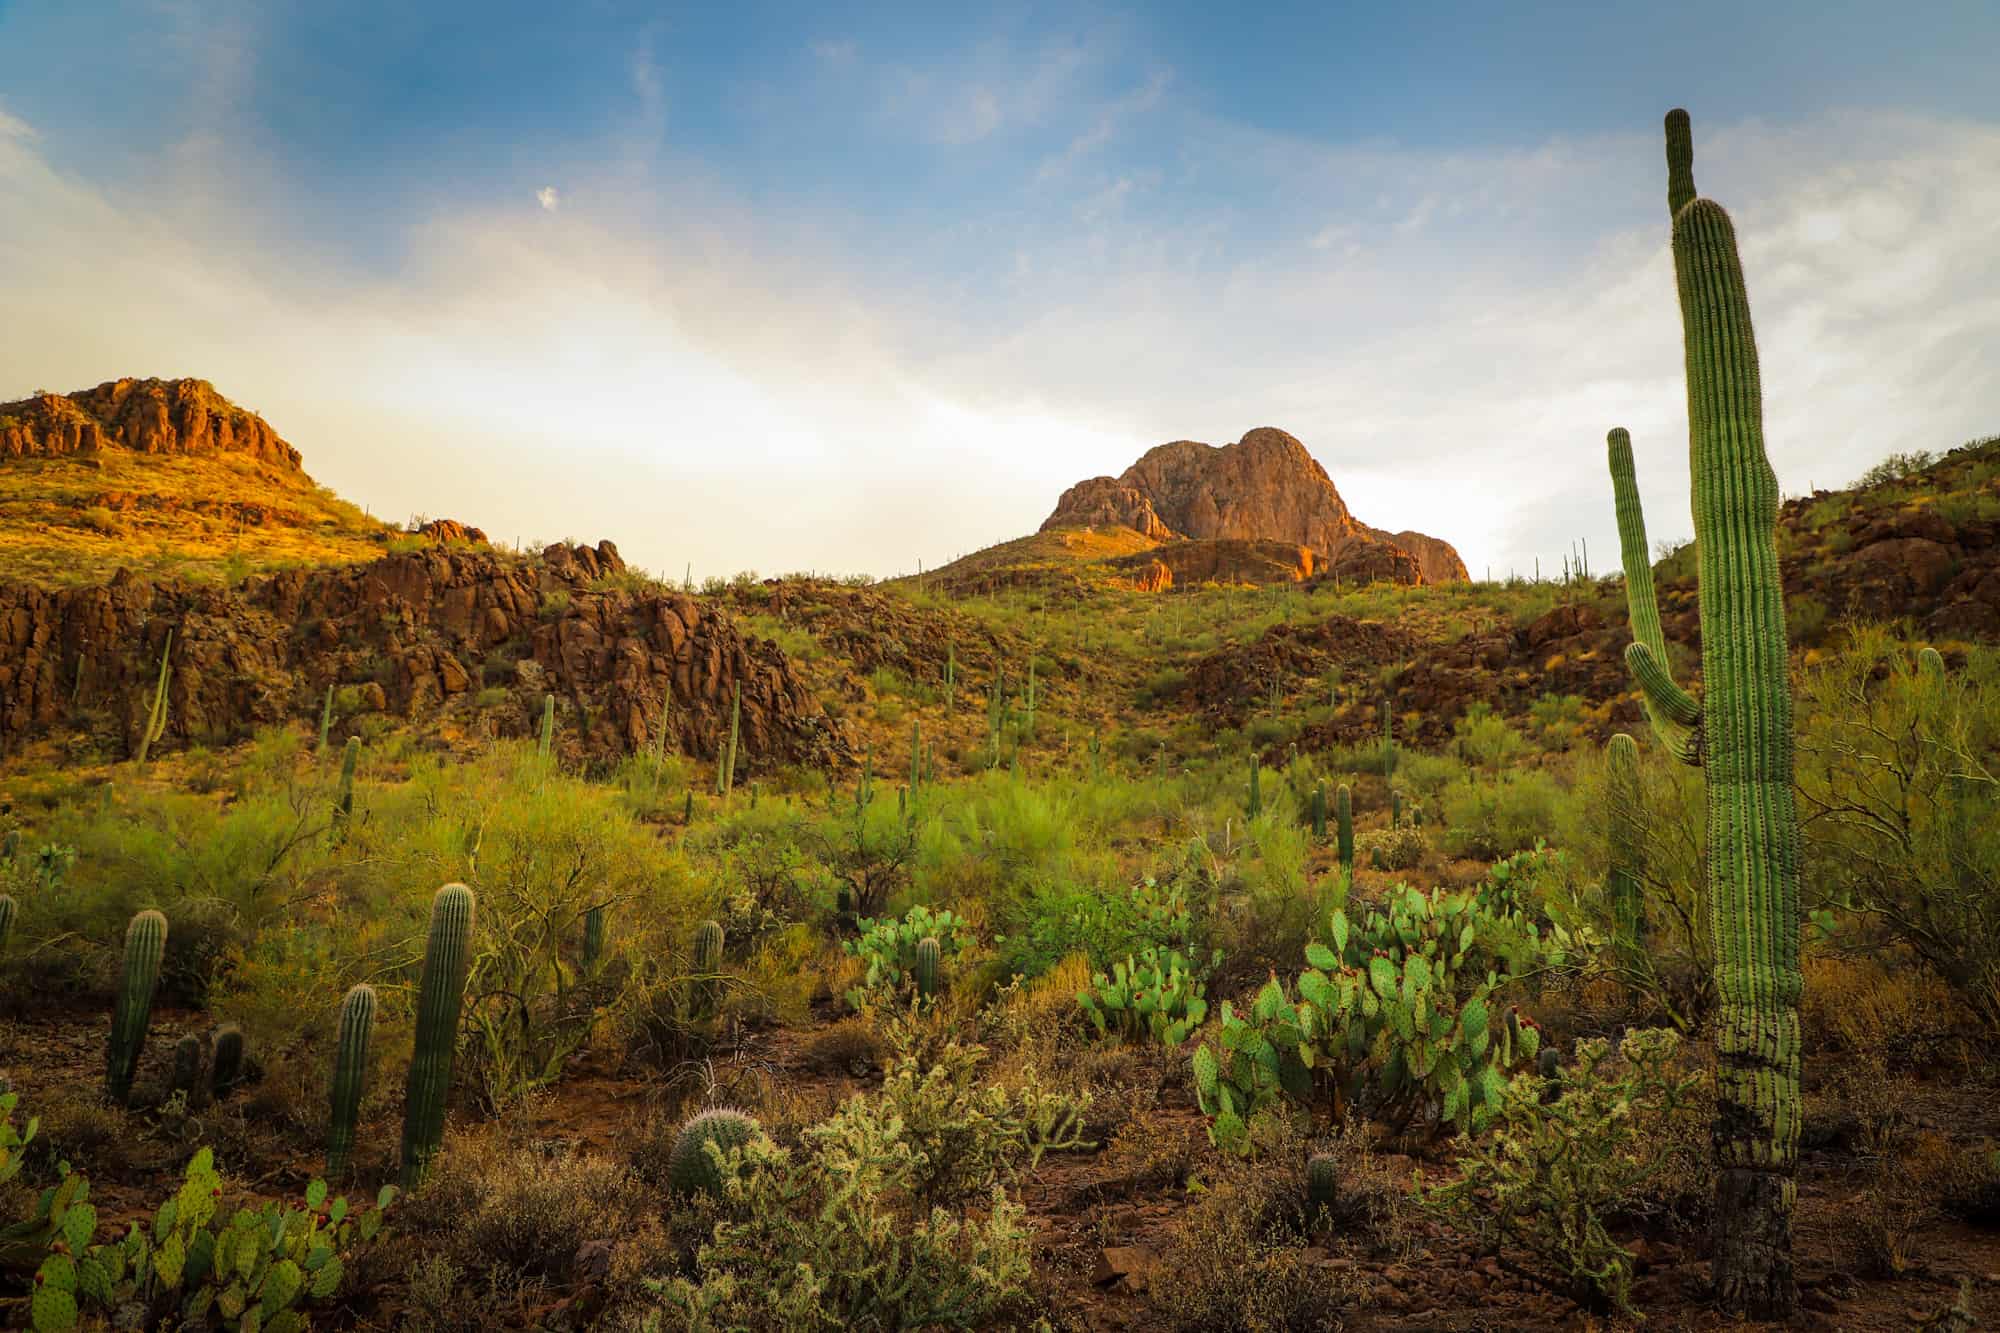 picture of rocky mountains and cacti in arizona, getting out in the nature surrounding tucson is part of our tucson itinerary